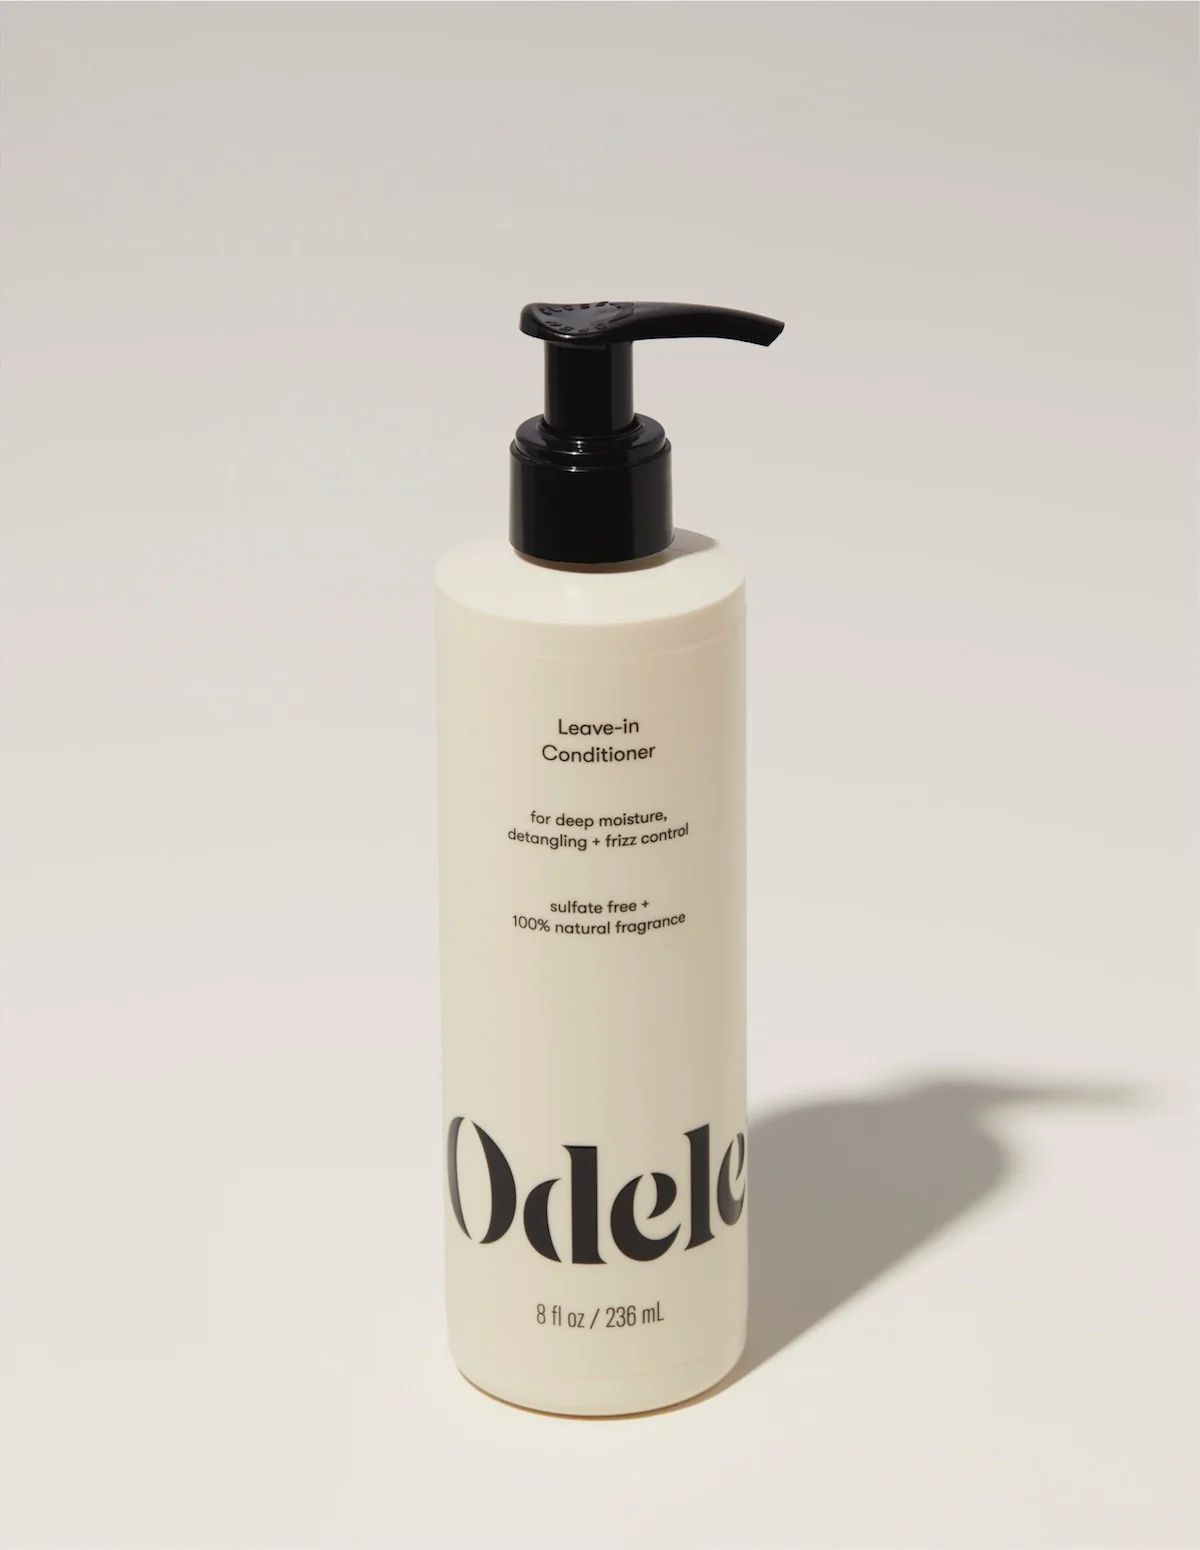 Leave-in Conditioner | Odele Beauty